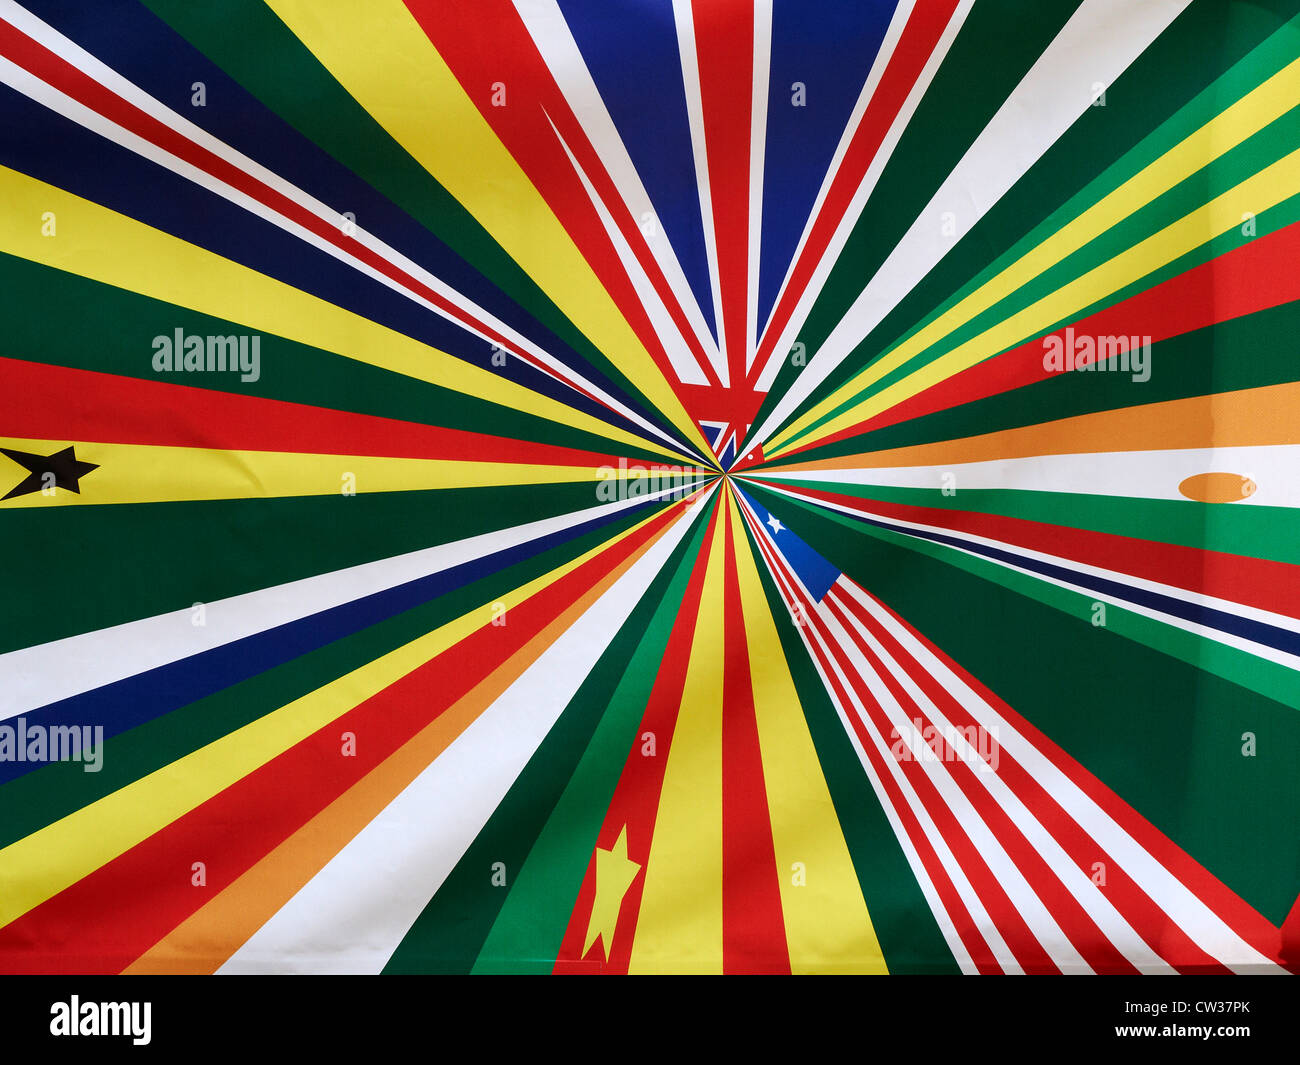 Poster of all world countries flags for the 2012 Olympics Stock Photo